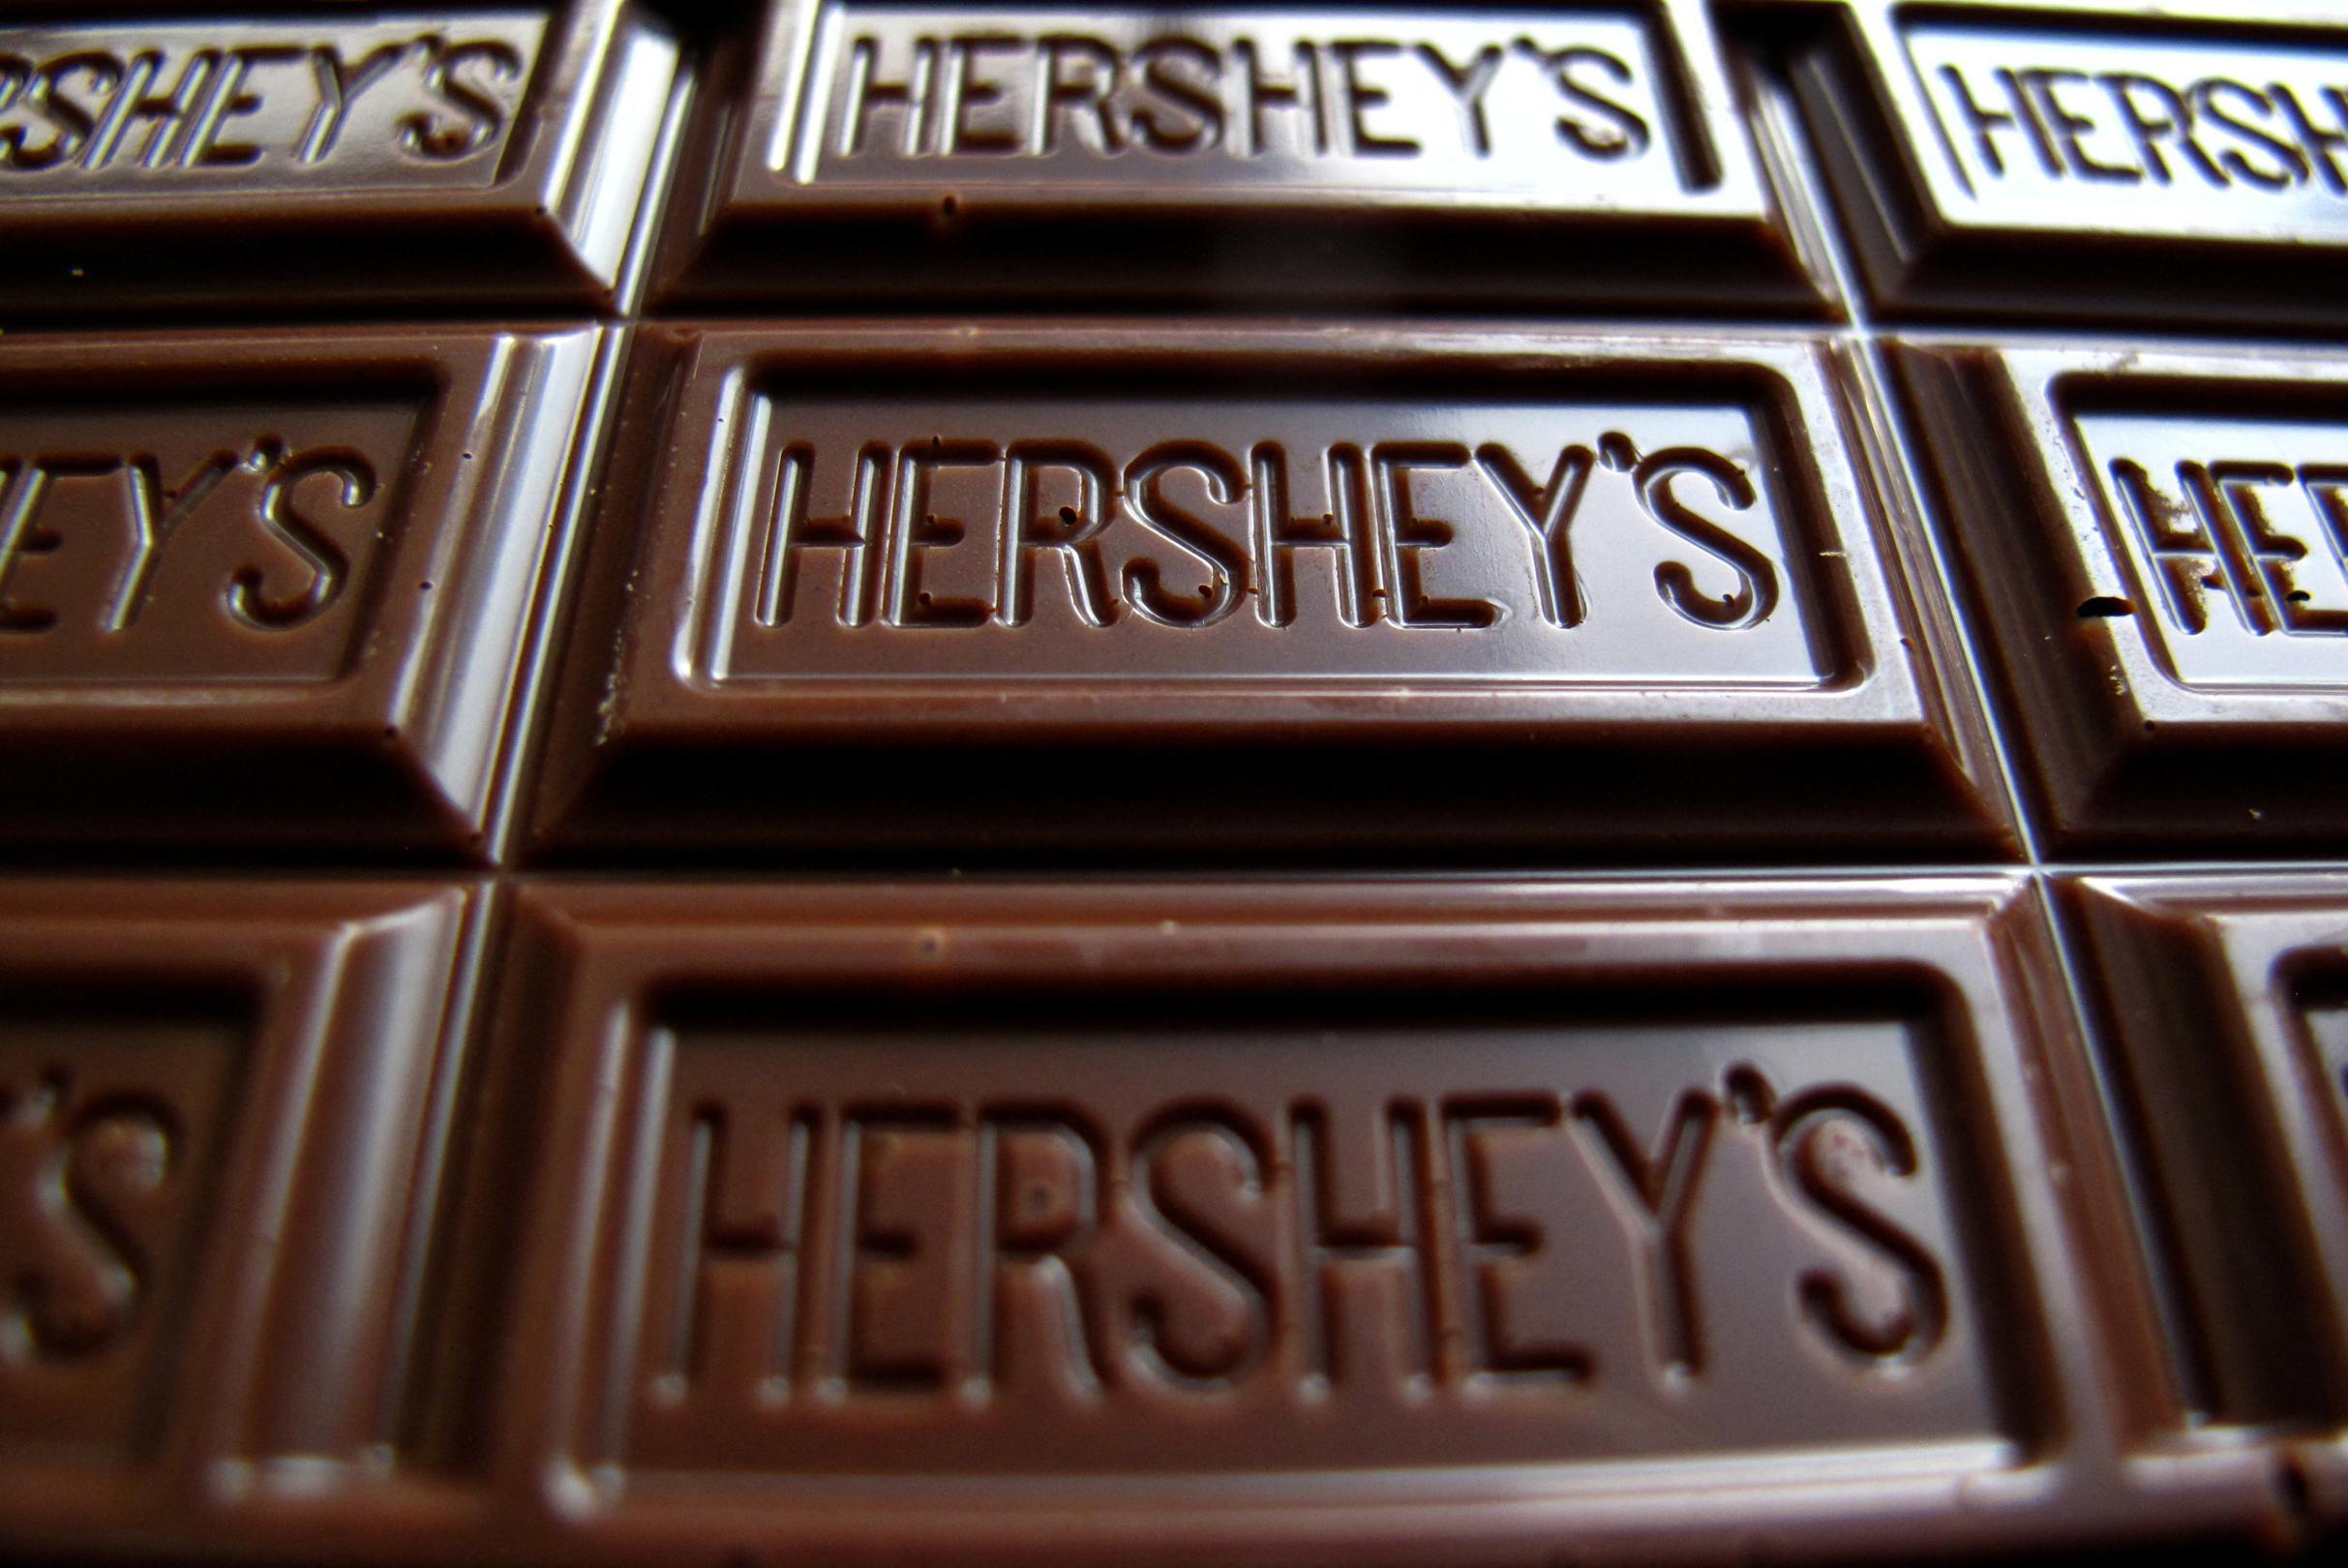 A million dollar lawsuit has been filed against an American chocolate brand due to the presence of heavy metals